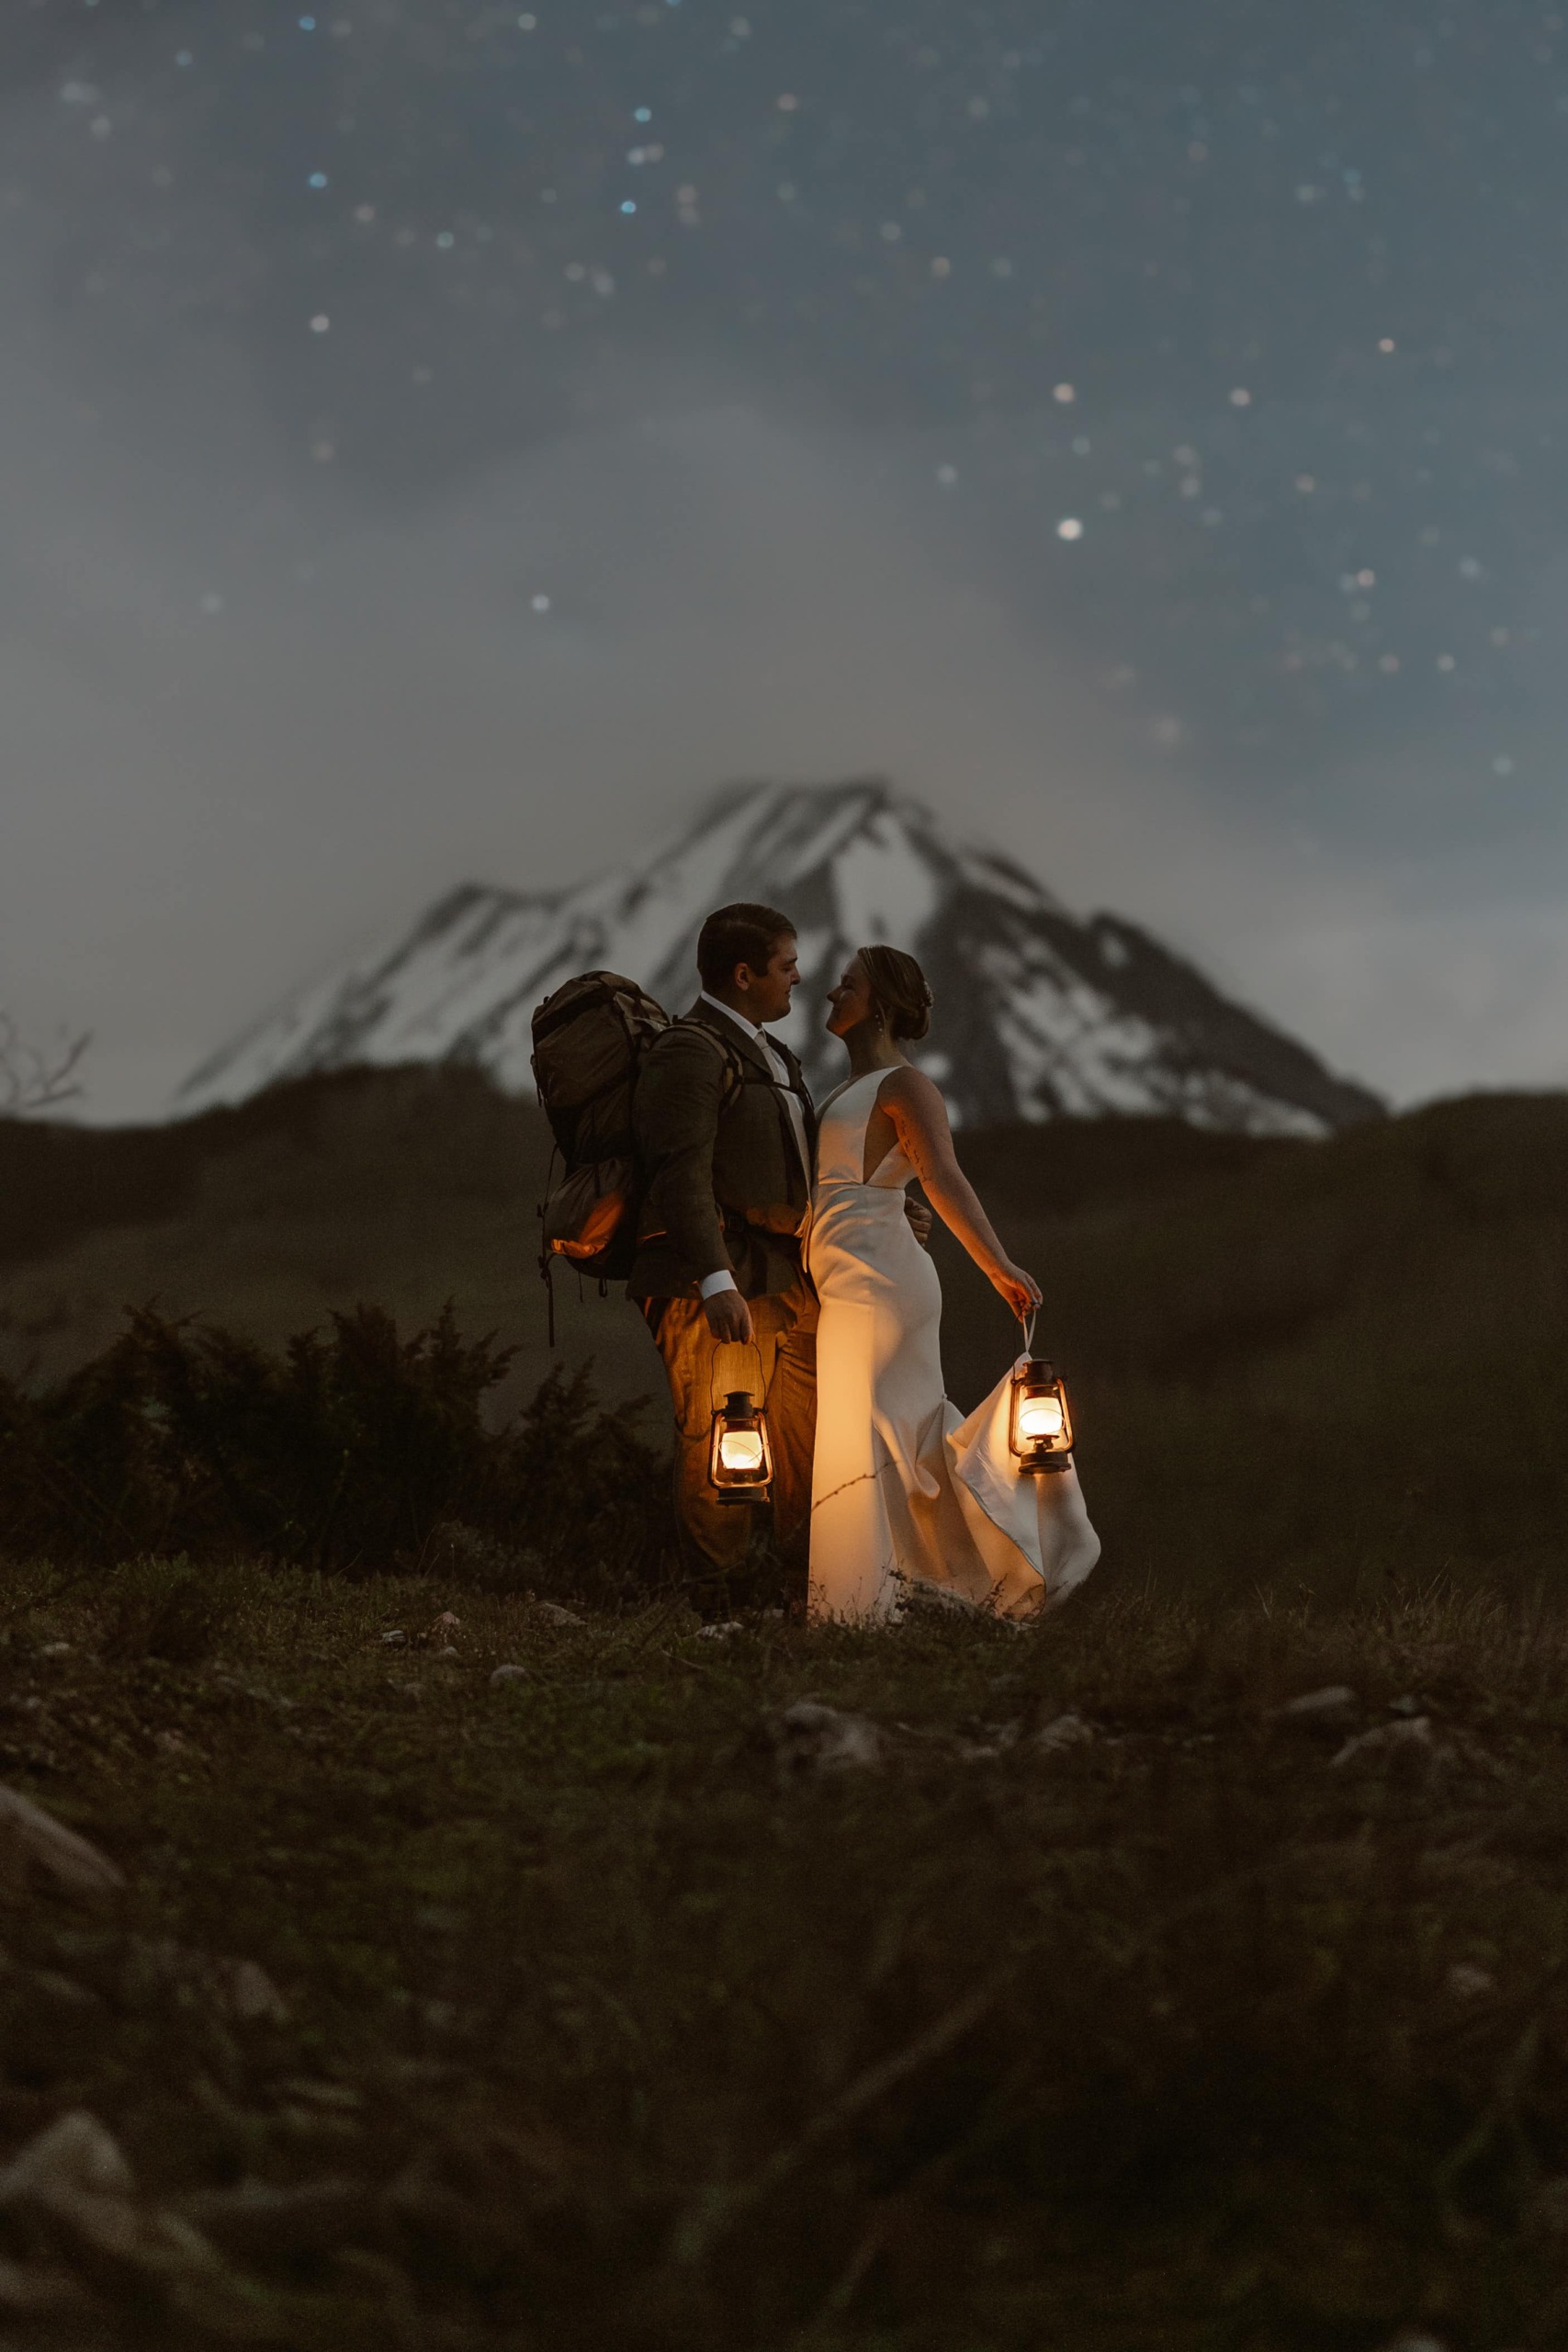 a couple wearing wedding attire standing and kissing while holding lanterns by their sides with a stary night mountain backdrop